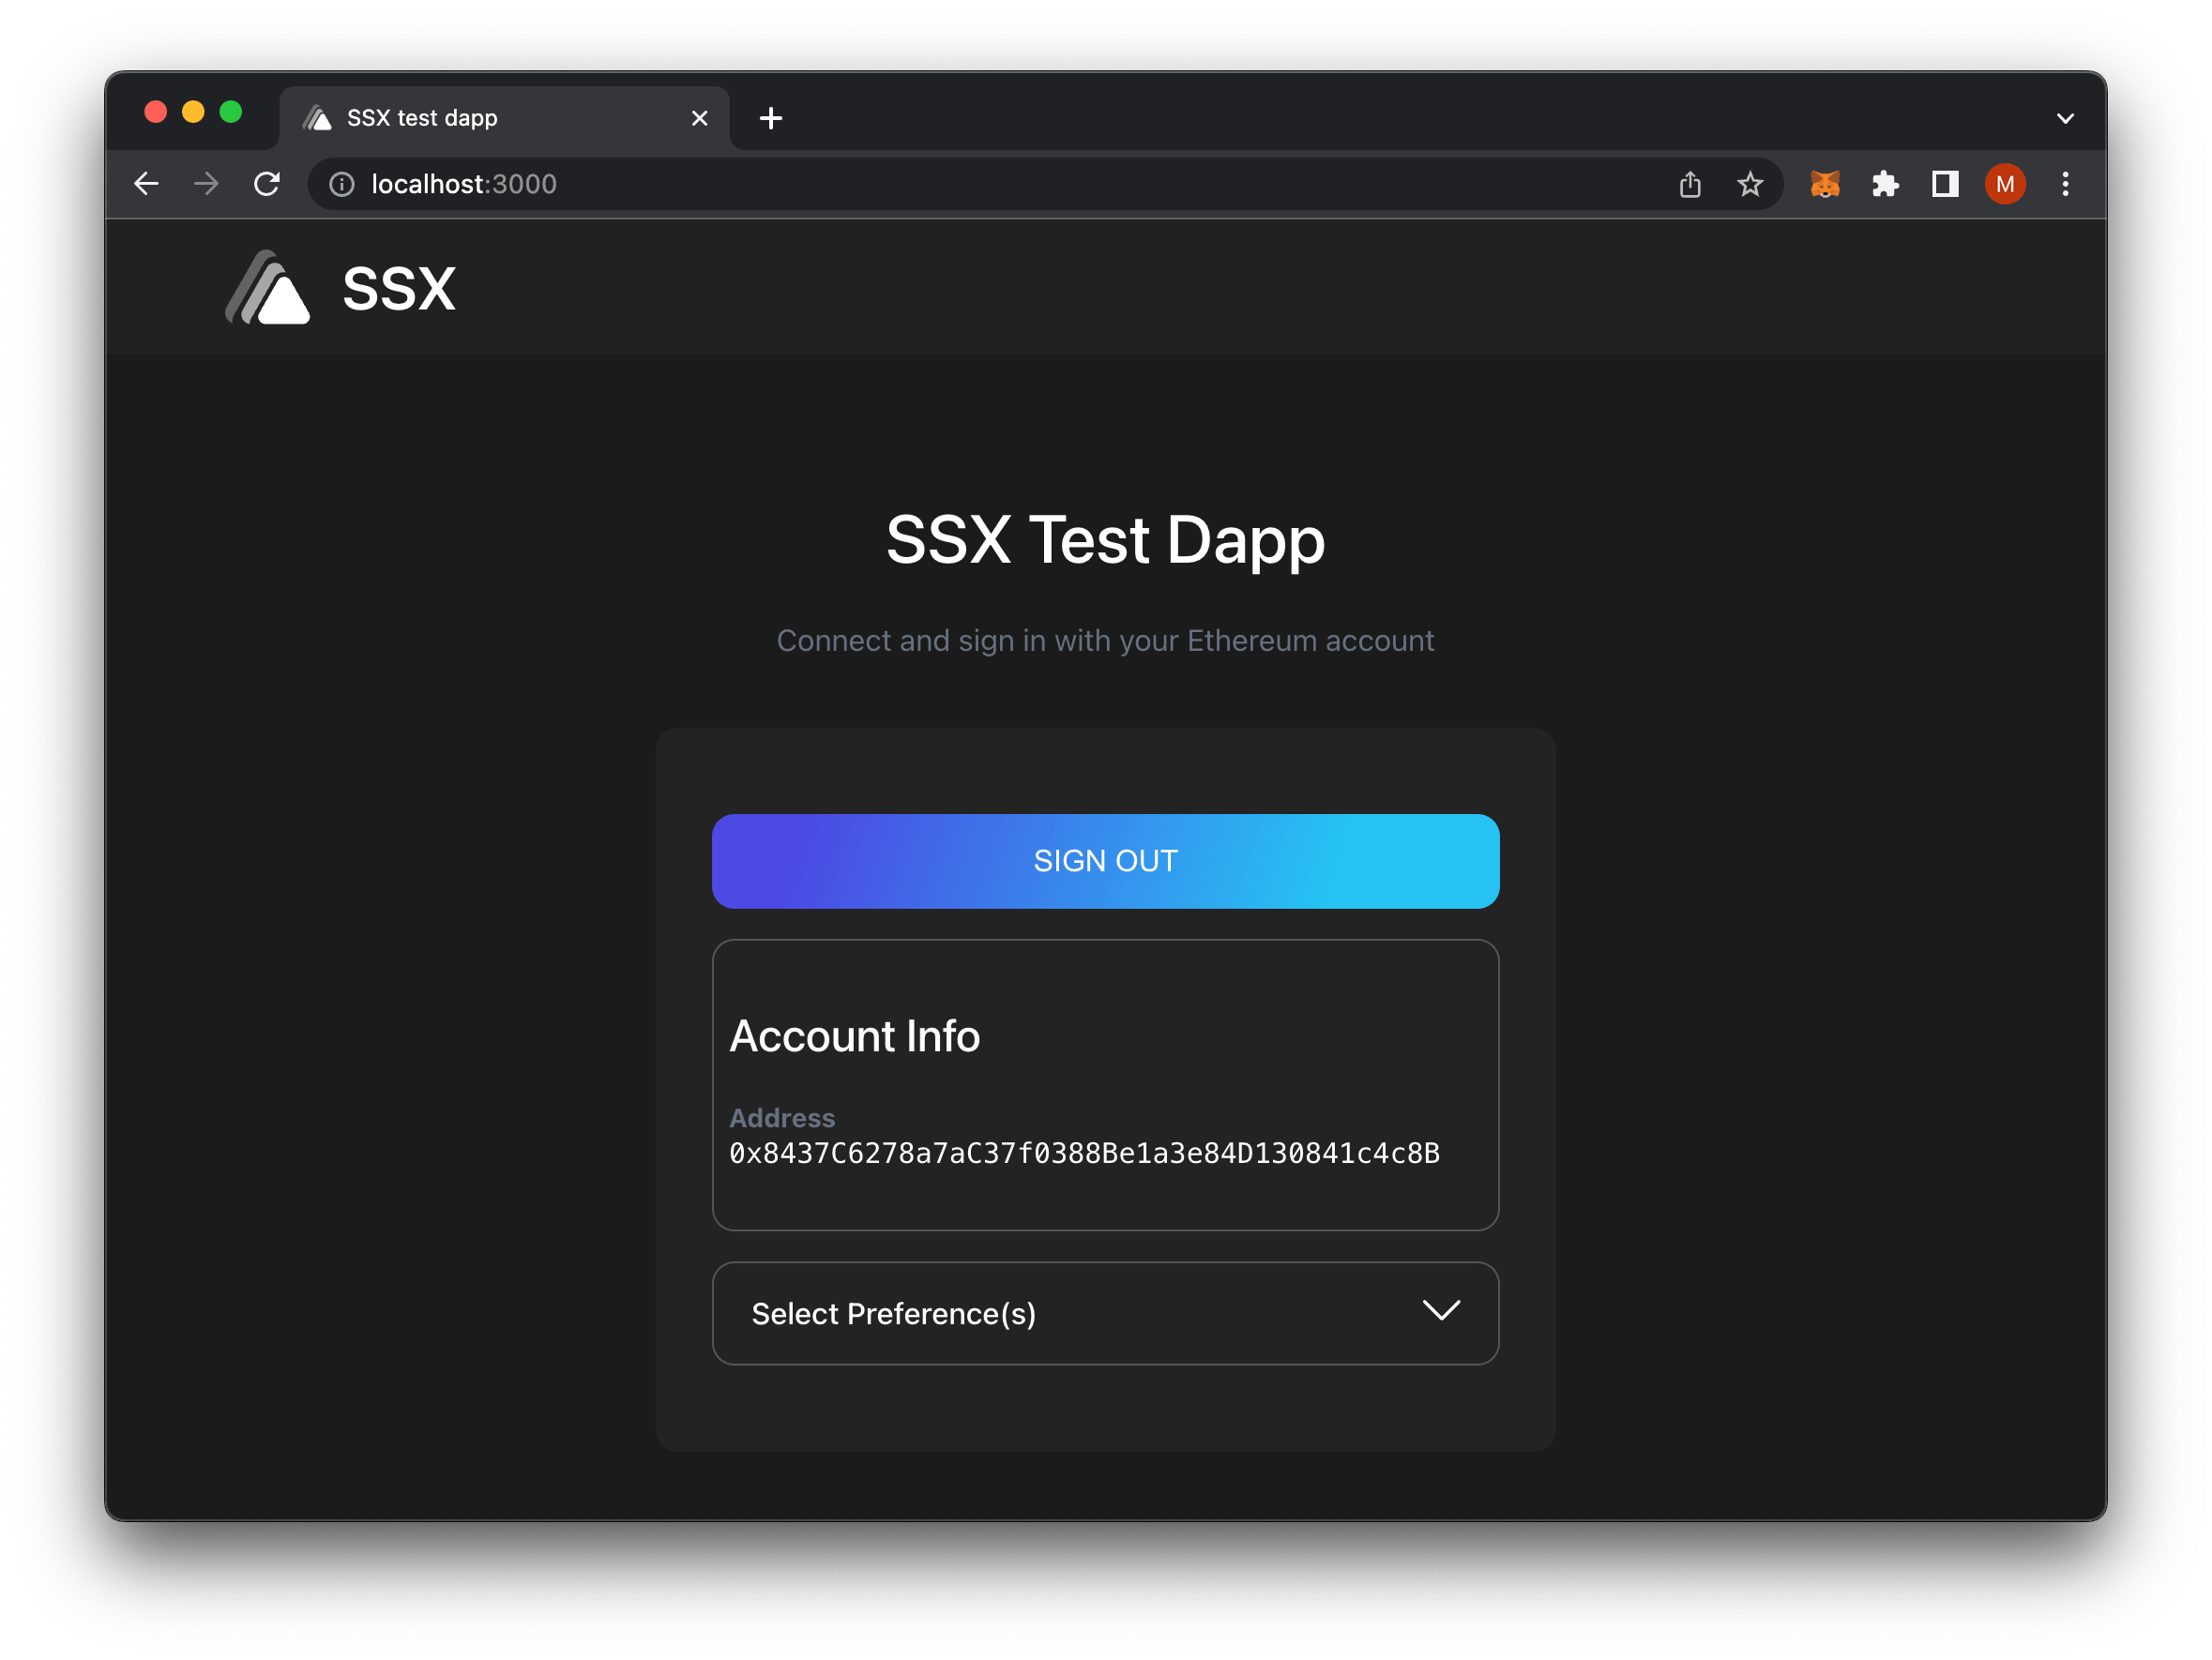 SSX Example Test Dapp Signed In As Safe Wallet